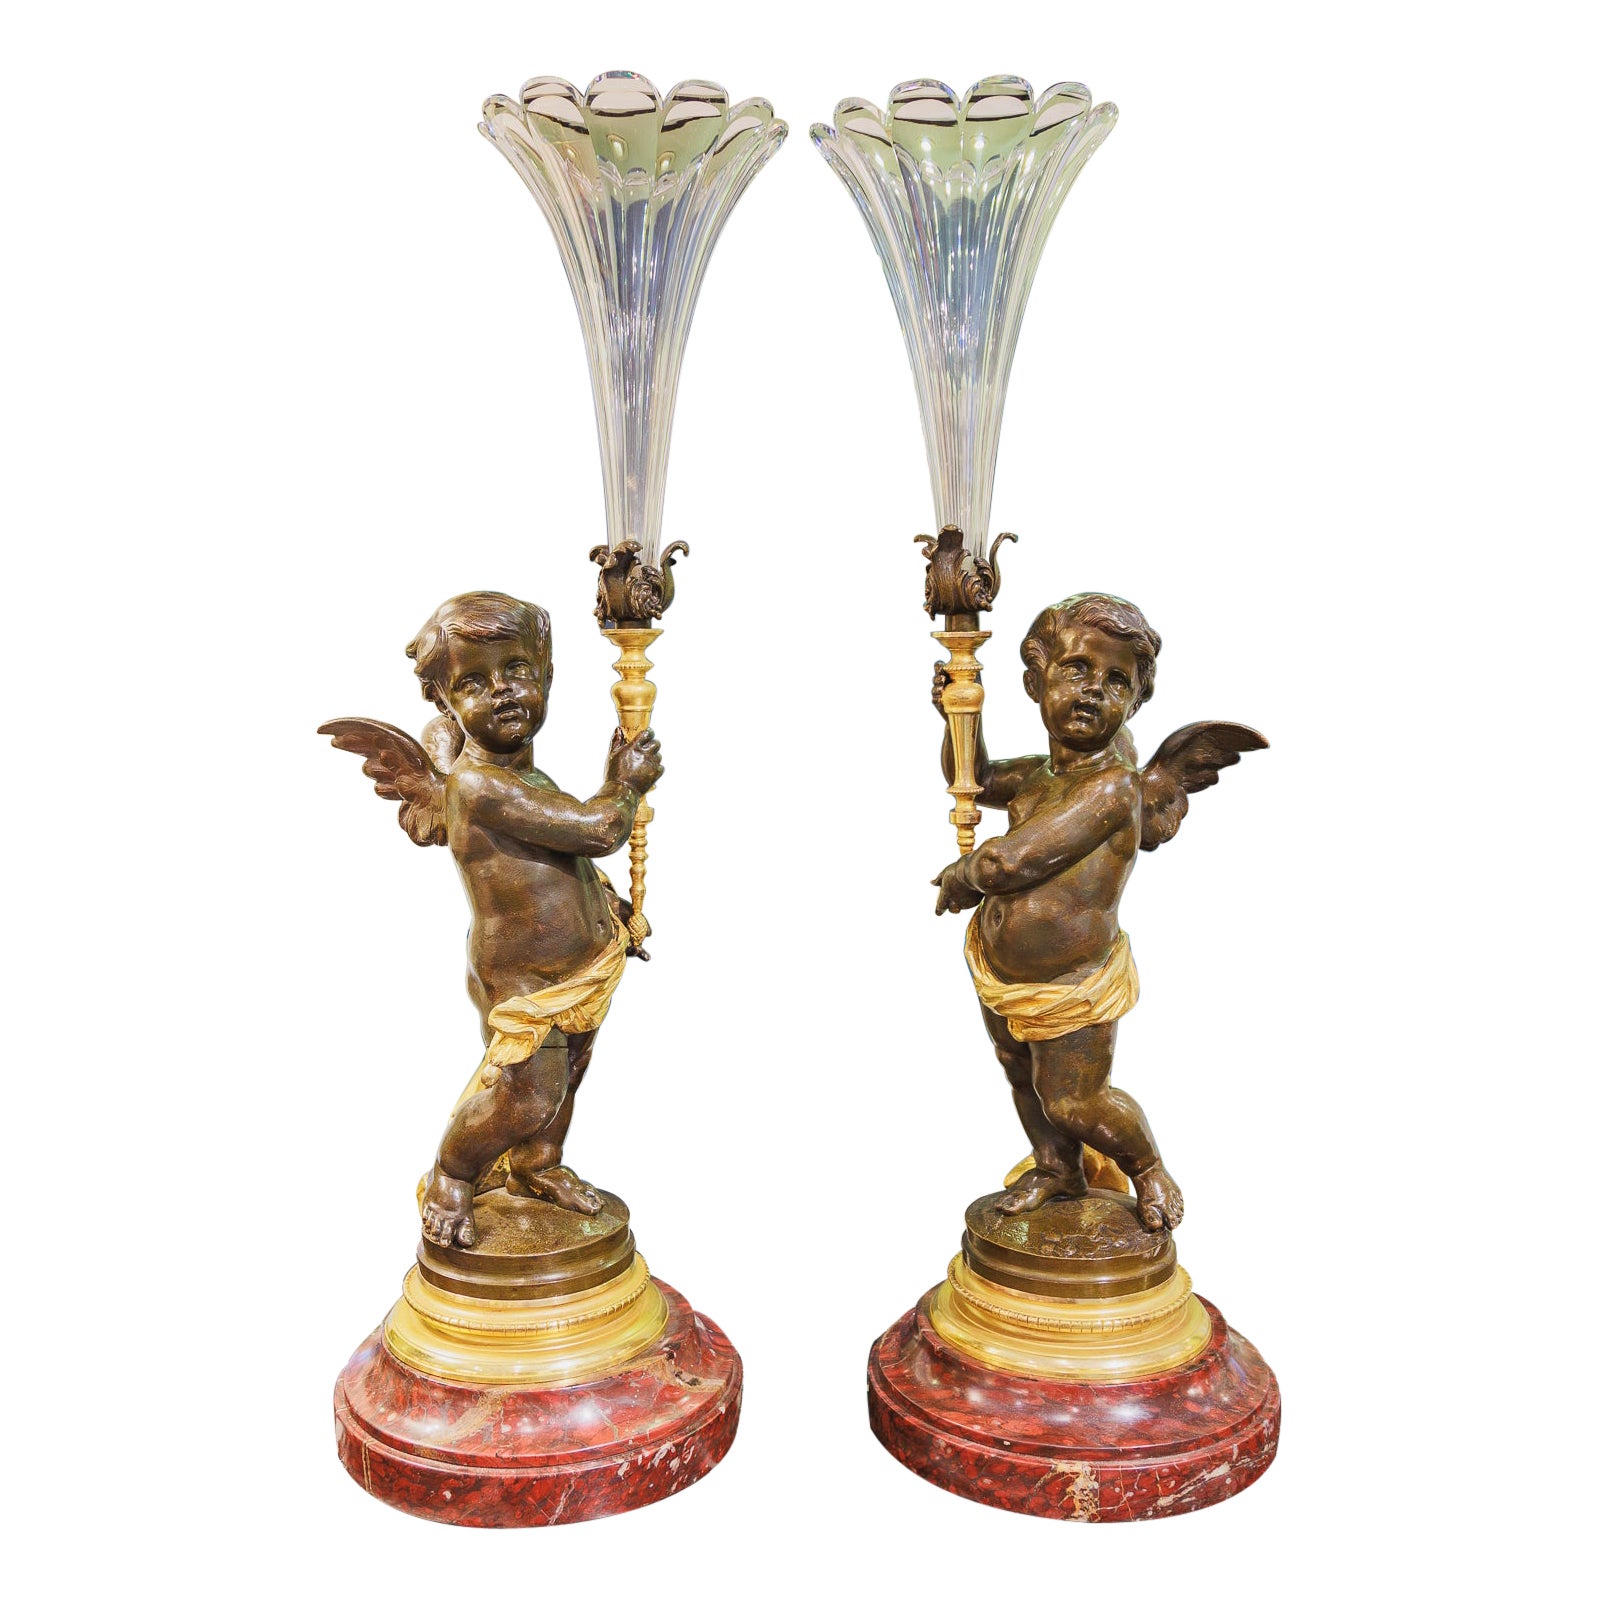 Beautiful Pair of Large 19th Century Bronzes of Cherubs by Victor Paillard For Sale